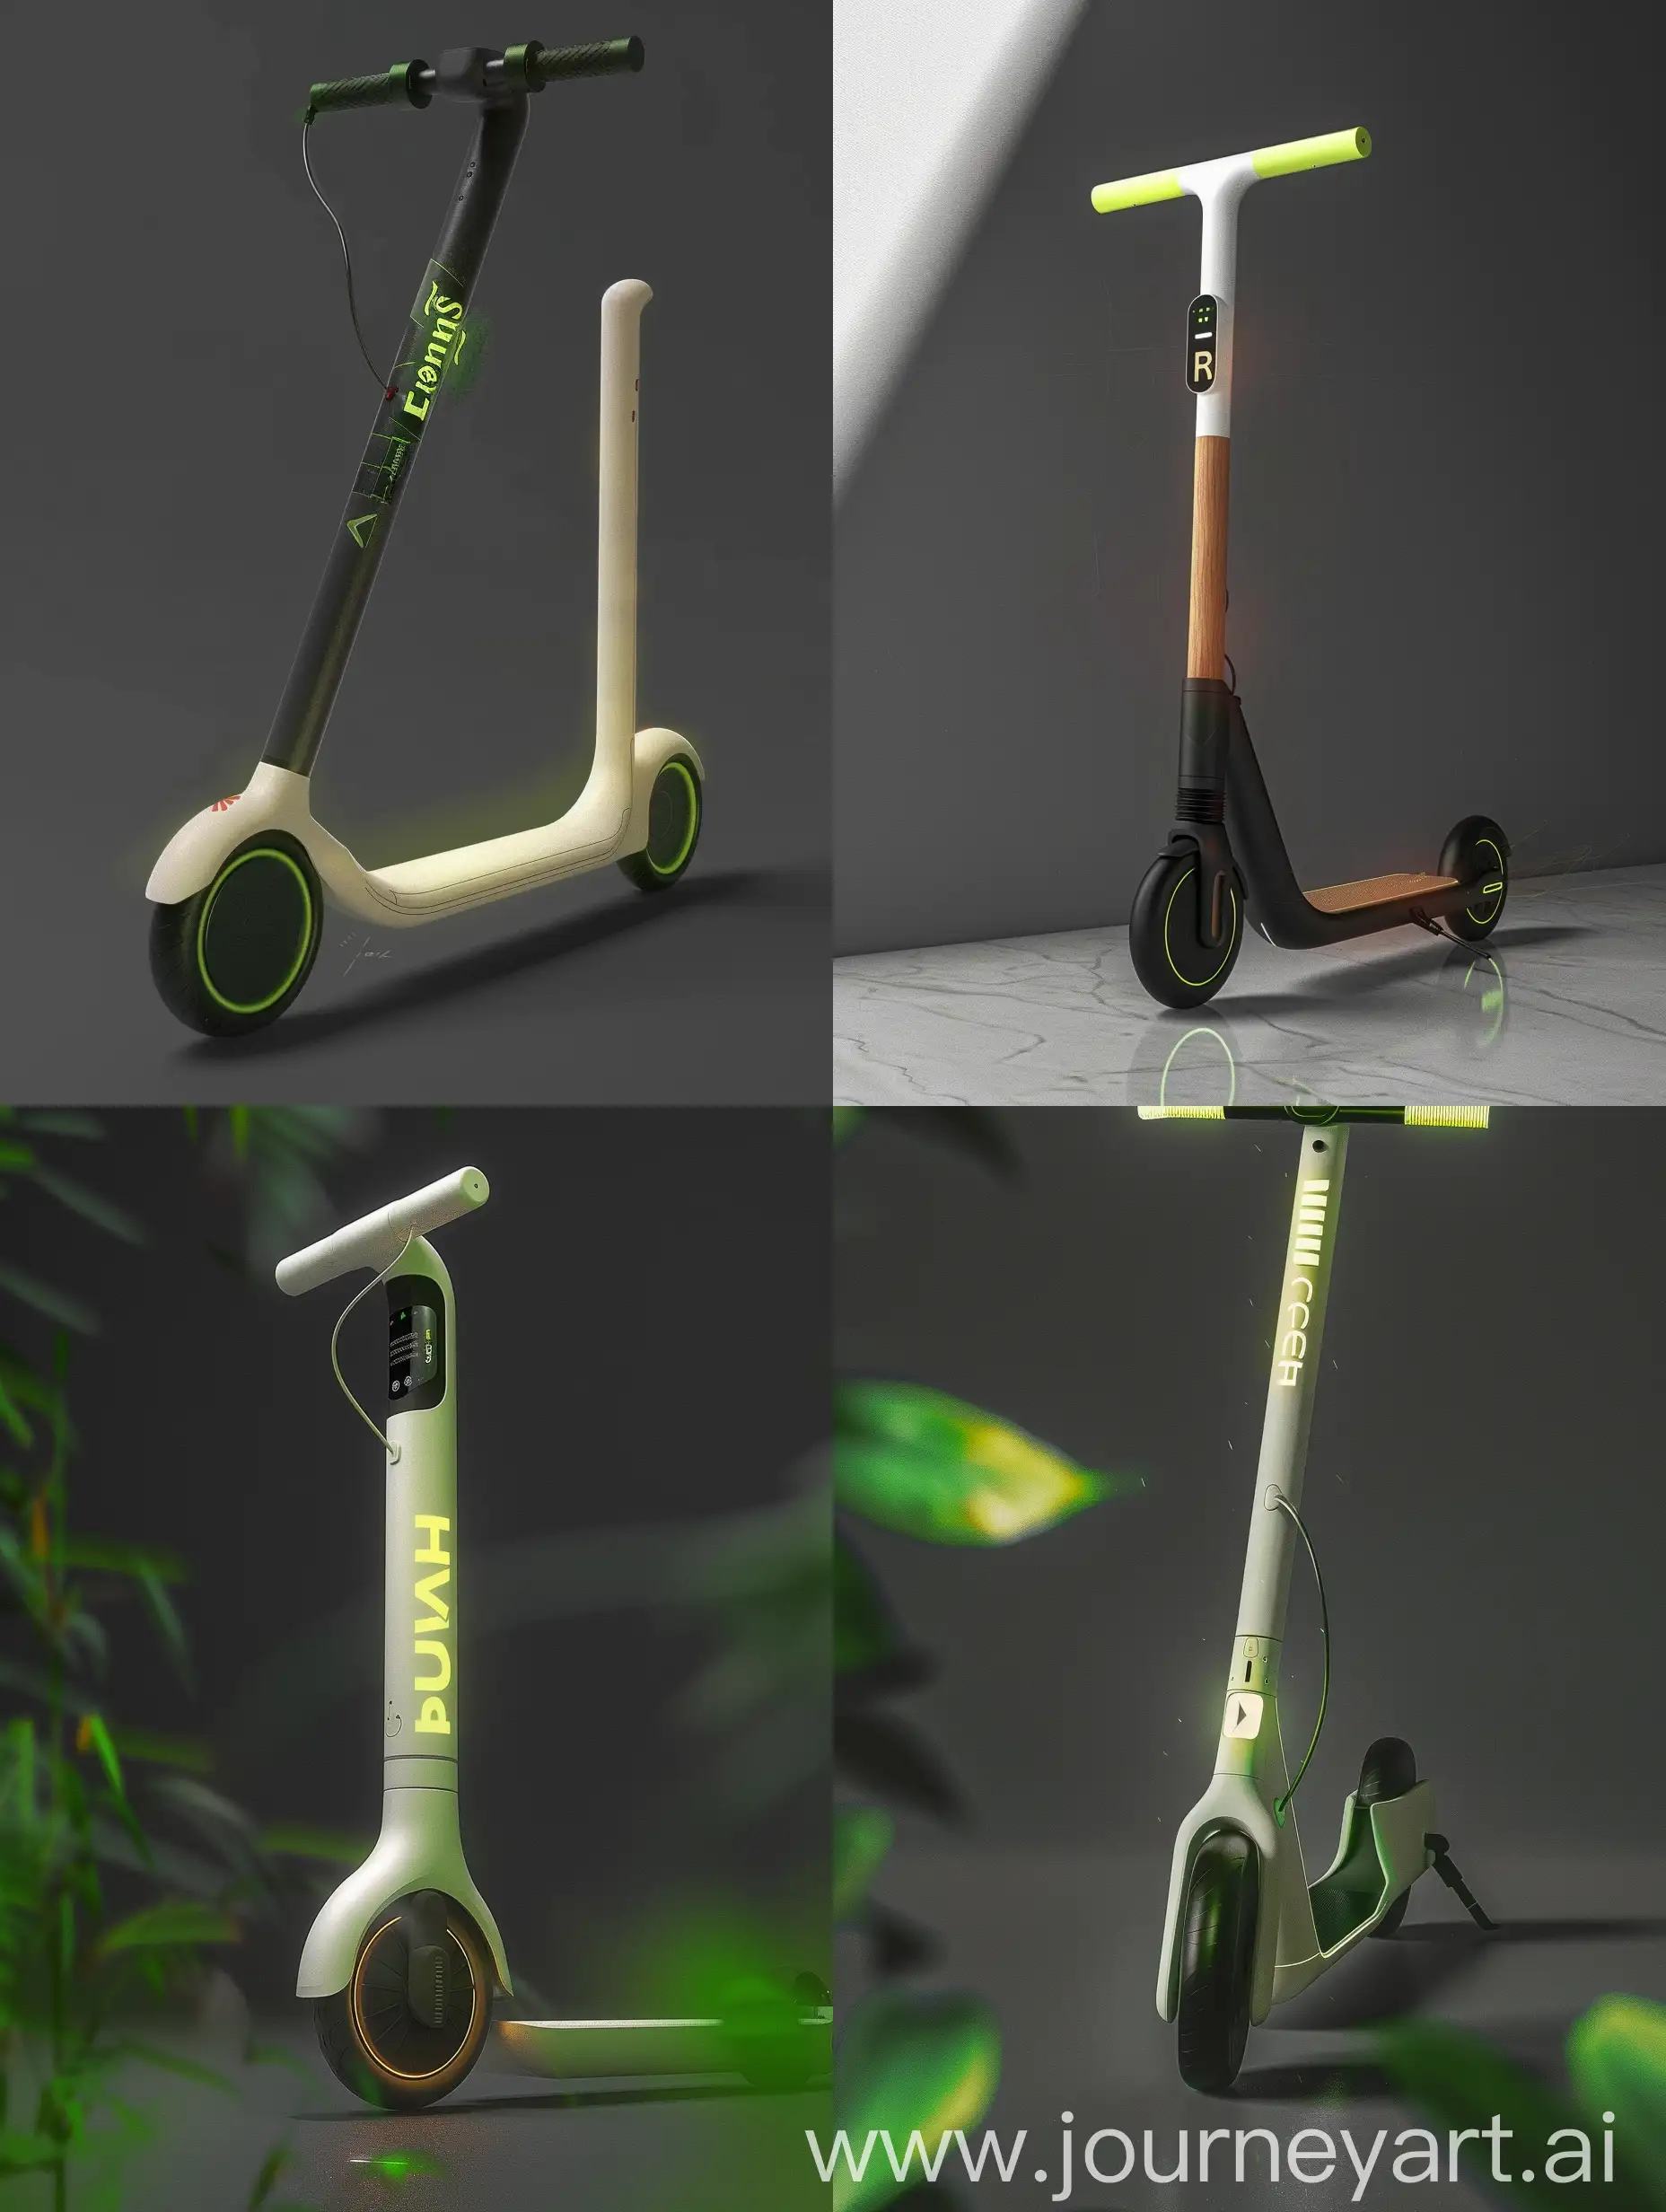 Design a elegance futuristic, foldable eco-friendly electric scooter inspired by the characteristics and symbolism of bamboo. The scooter features sleek, smooth curves with a matte warm white finish and slight transparency, accented with green tones inspired by bamboo. The handle design is minimalistic and curved, inspired by bamboo leaves, with a subtle texture, made from durable composite materials. The footboard is a multi-segmented structure with a textured, non-slip surface, folding neatly into the main body.The scooter folds into a compact cylindrical shape with non-uniform cross-sections mimicking bamboo segments. The wheels are retractable, folding into the body via a spring-loaded and gear system inspired by the retraction mechanisms of turtle limbs, ensuring a smooth, unified form. The handles fold inward along precise hinge lines, inspired by the folding of insect wings and Mimosa pudica leaves, using spring-loaded or magnetic hinges.The scooter includes solar panels for sustainable charging and a kinetic energy recovery system. A small, integrated display on the handlebar shows the map, path, charge level, and weather conditions. The design emphasizes both form and function, suitable for urban commuting, highlighting eco-friendliness and innovation. Materials used are lightweight composites with a matte warm white and slightly transparent finish, accented with green tones. The handlebar features an integrated power button and a folding/unfolding button for ease of use, with the LED display centered for clear visibility. The overall design is clean, minimalistic, and inspired by the natural elegance and segmented structure of bamboo. The scooter also features customizable LED lights and mobile app integration for personalization and tracking of usage and environmental impact.